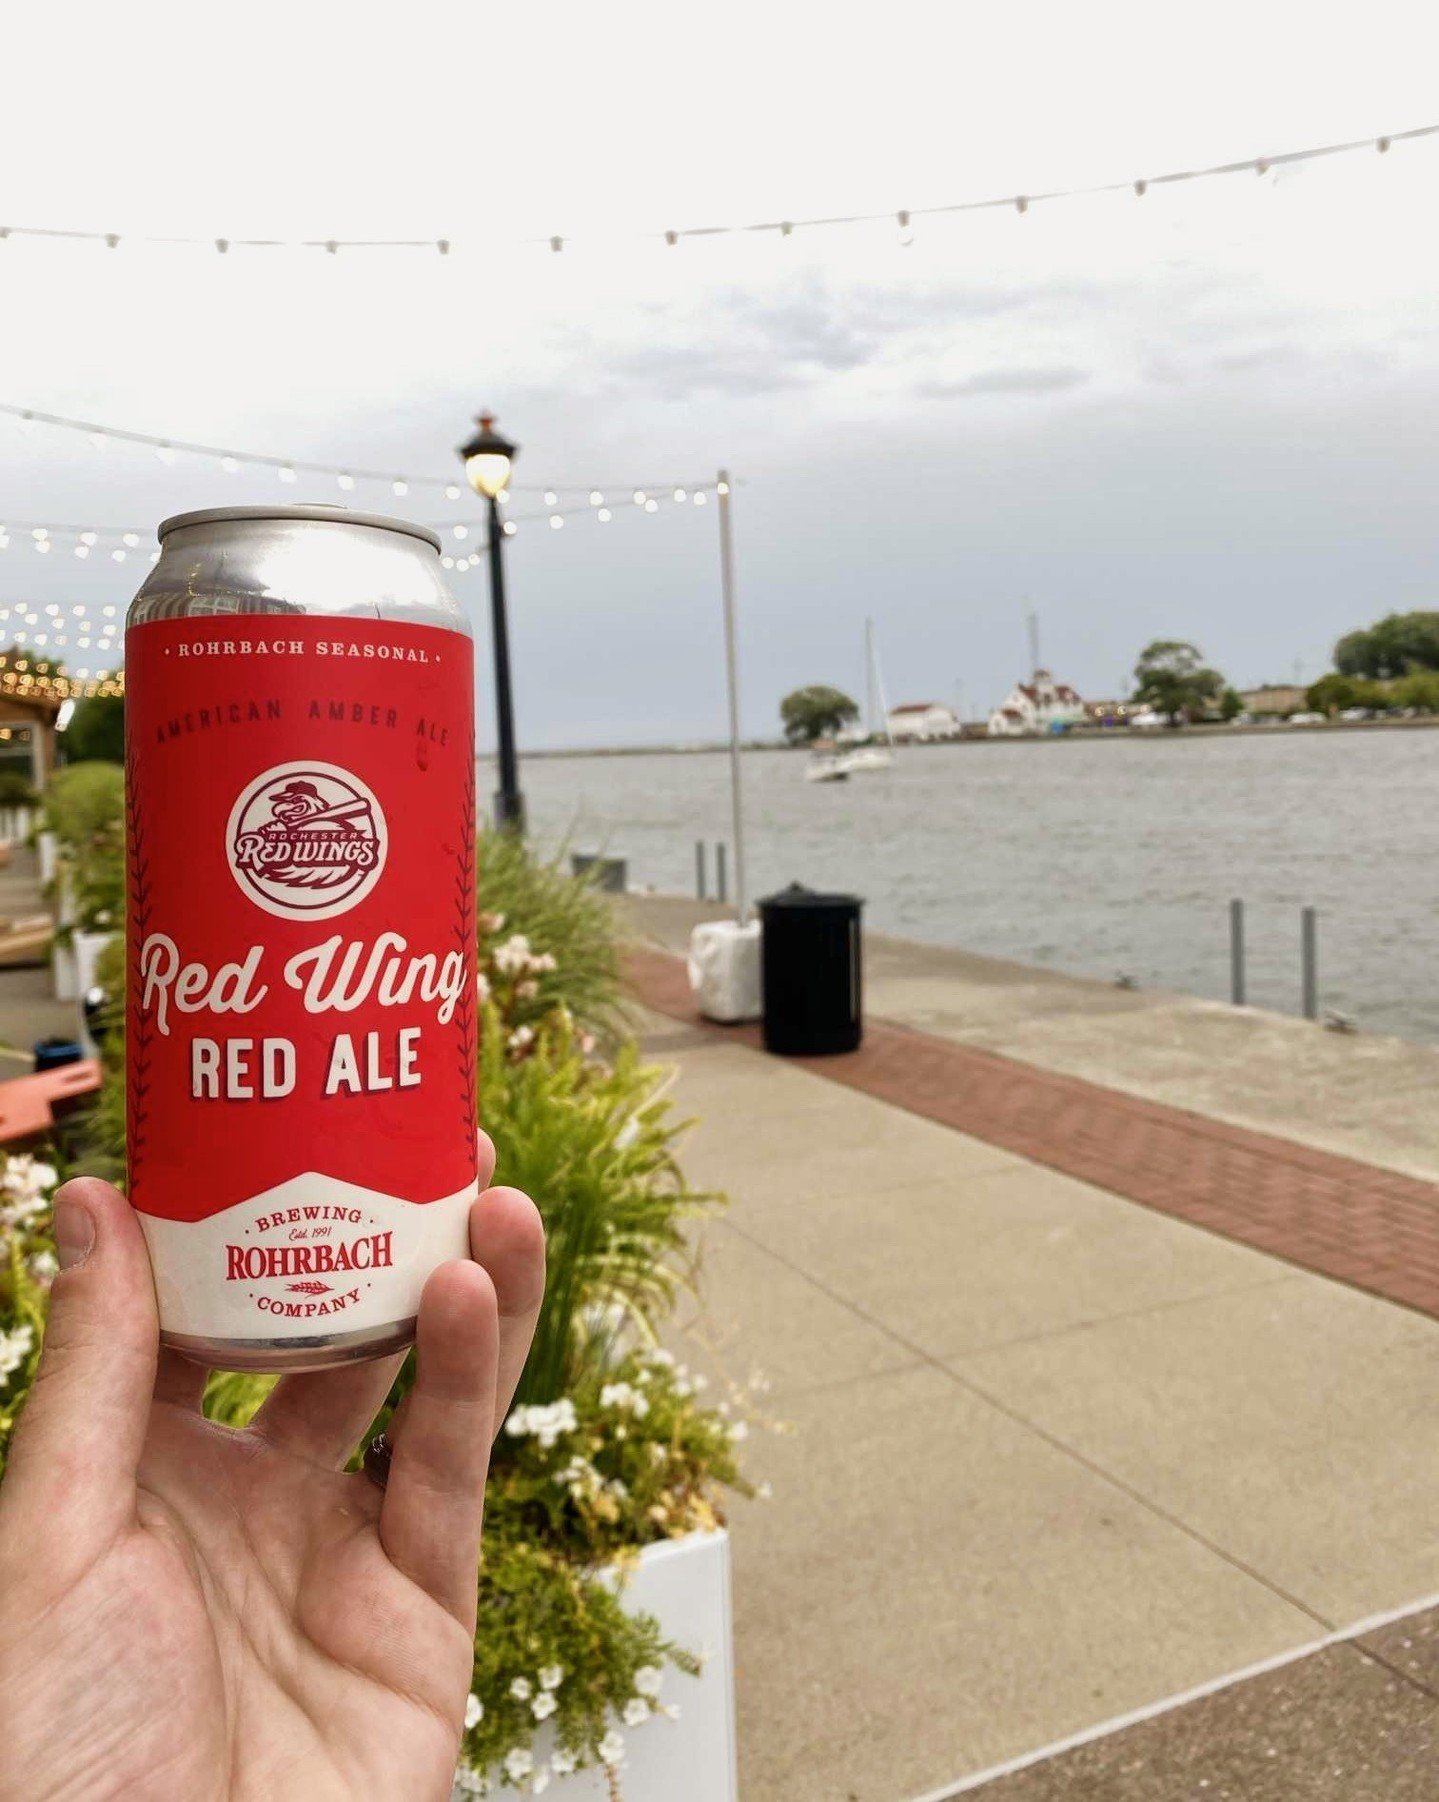 Tonight's @rocredwings game forecast shows signs of tall, red cans of local brews ⚾️⁠
⁠
📷 John Dunphy⁠
⁠
#redwingredale #rochesterredwings #baseballbeer #explorerochester